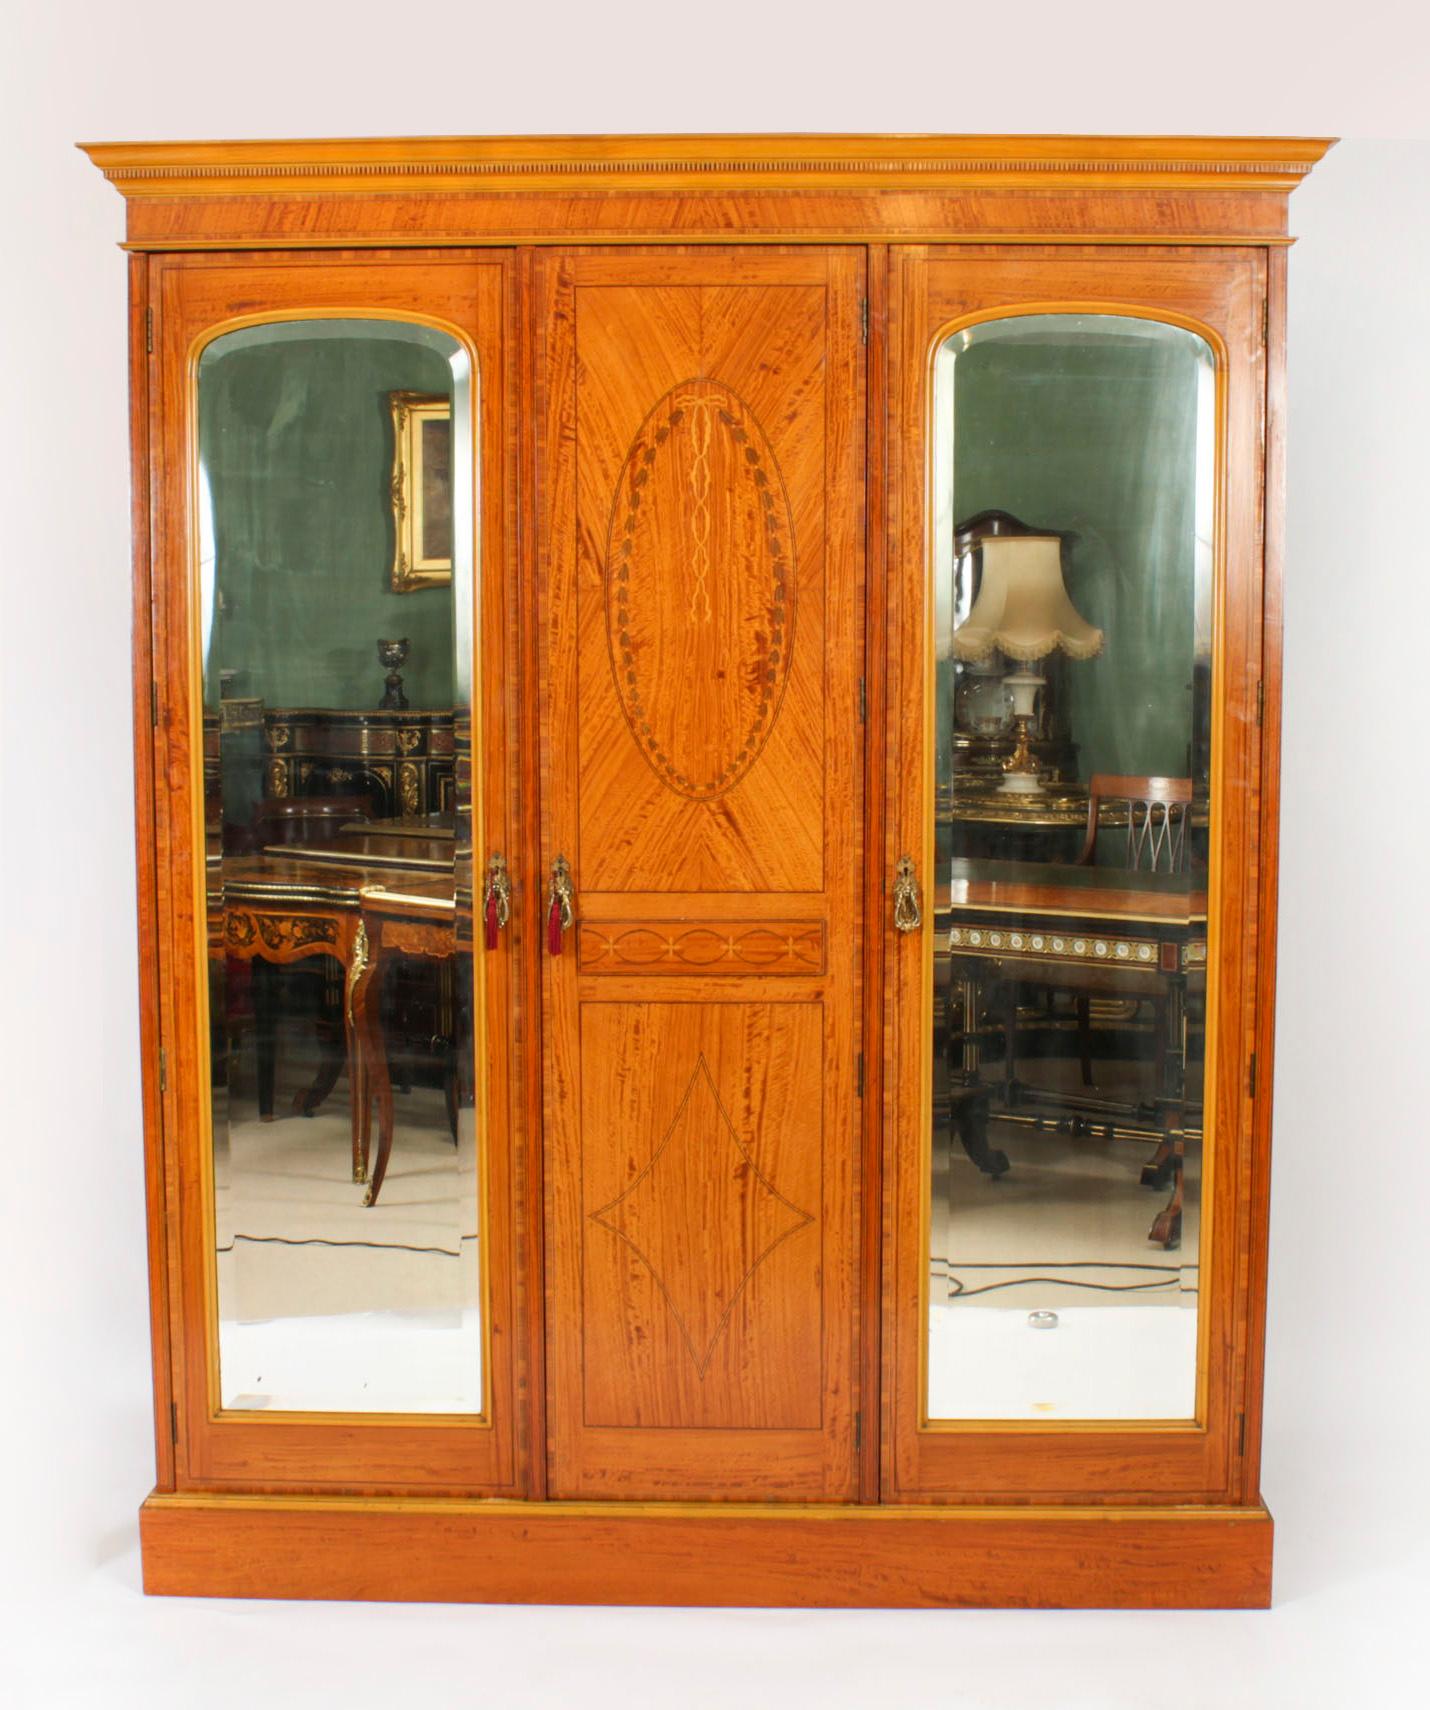 This is a large rare and impressive antique English satinwood, tulip wood banded and marquetry inlaid compactum wardrobe, by the world renowned cabinet maker and retailer Maple &Co, circa 1880 in date.
 
The central section has a panelled cupboard